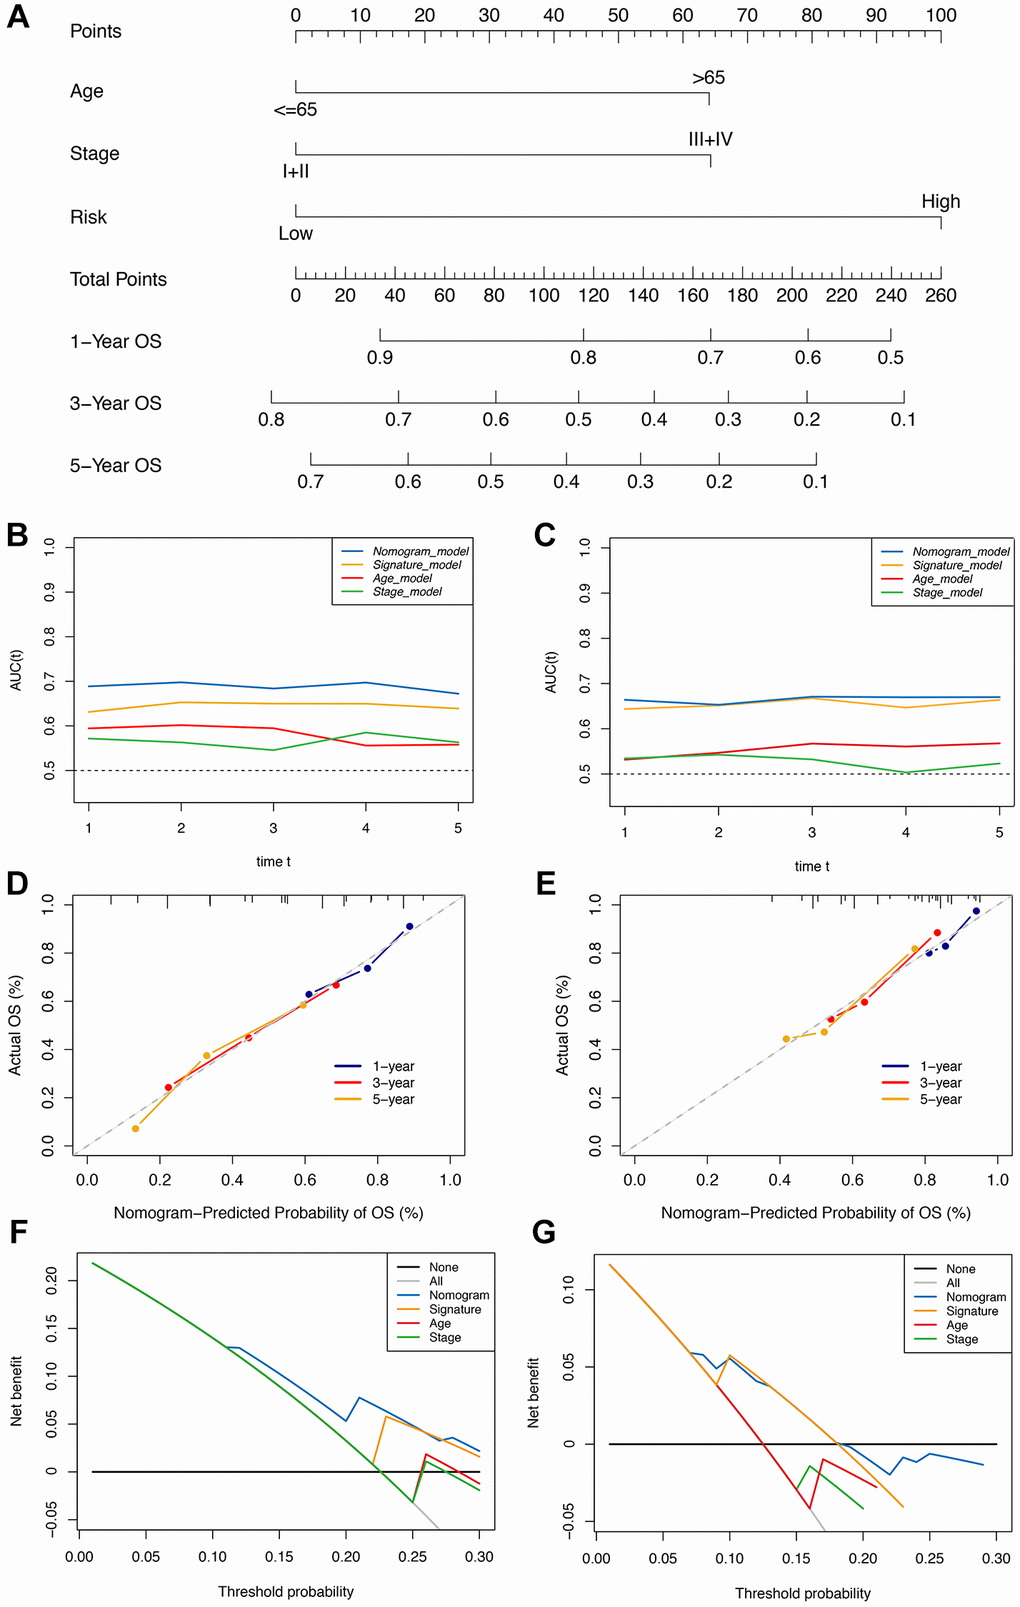 Construction of the immune-clinical nomogram. (A) The nomogram for predicting 1-year, 3-year, and 5-year OS for GC patients. (B, C) Time-dependent ROC curves for the nomogram, immune signature, age, and stage models at different time points in the TCGA and GEO datasets. (D, E) Calibration curves of observed and predicted probabilities for the nomogram in the TCGA and GEO datasets. (F, G) DCA curves for the nomogram in the TCGA and GEO datasets.